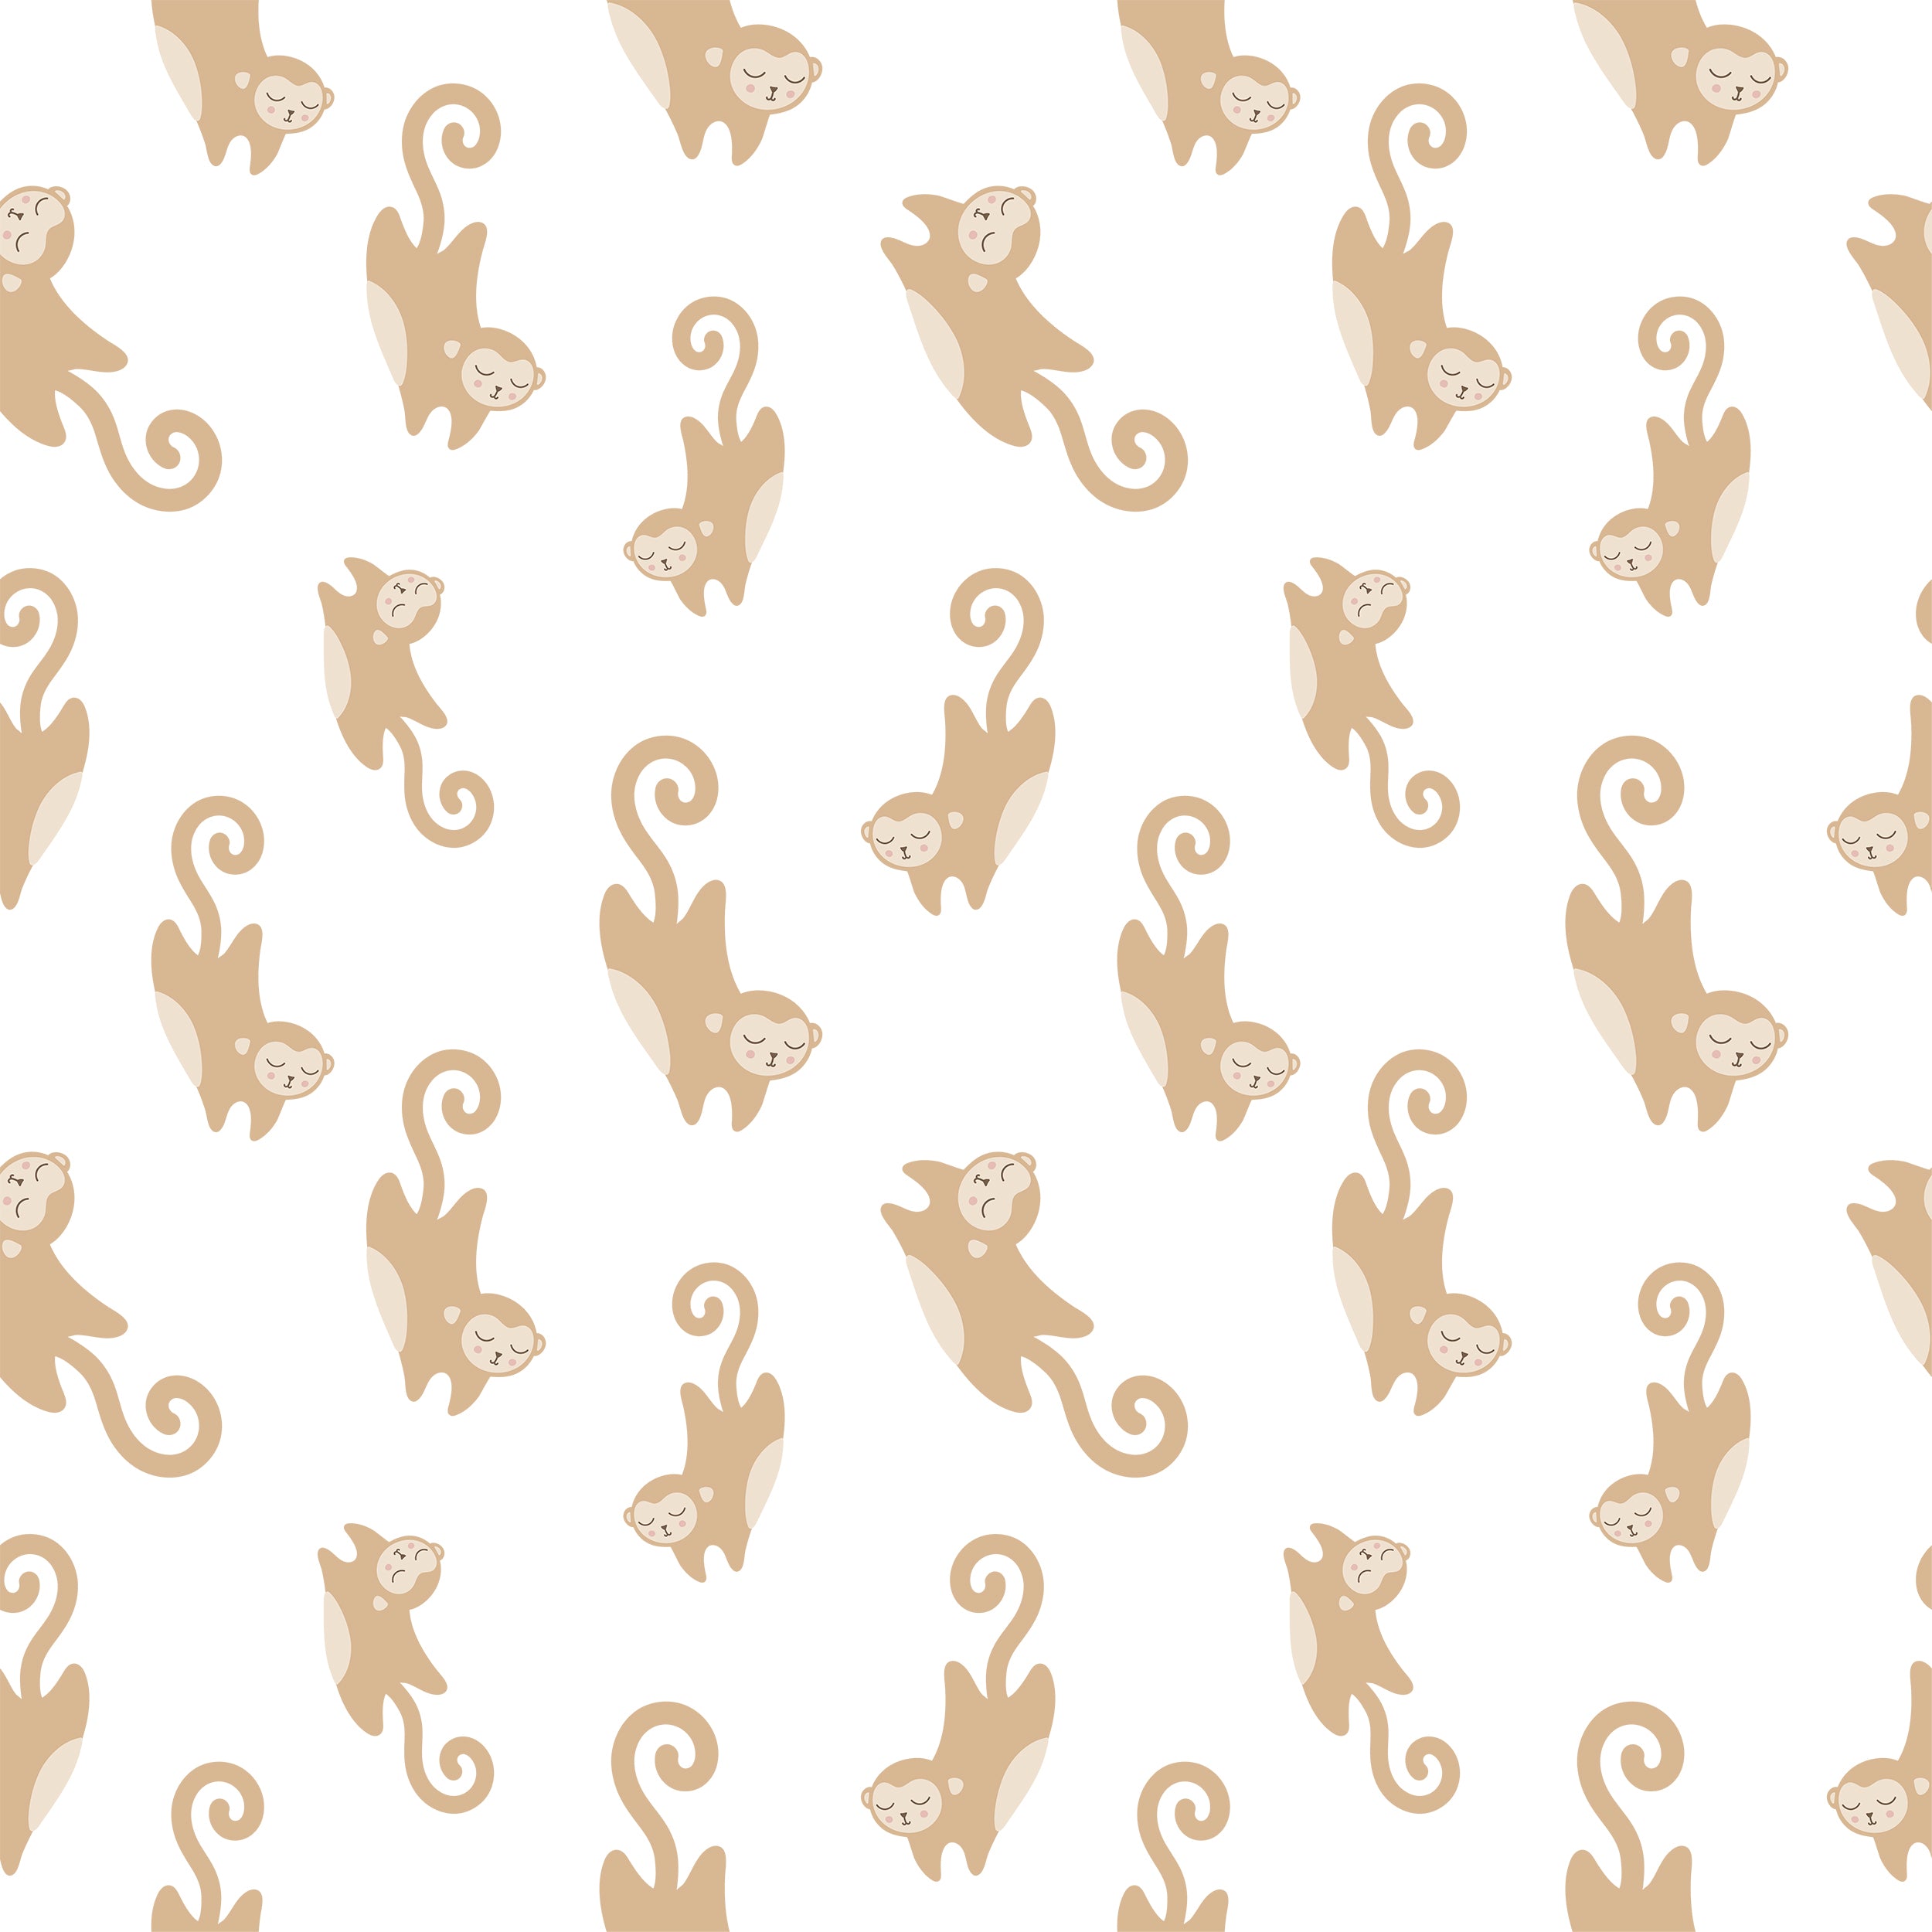 Detailed view of Cute Monkey Wallpaper featuring playful monkey motifs in beige and taupe shades on a white background. Each monkey is depicted in a dynamic, playful pose, adding a whimsical charm to the design.